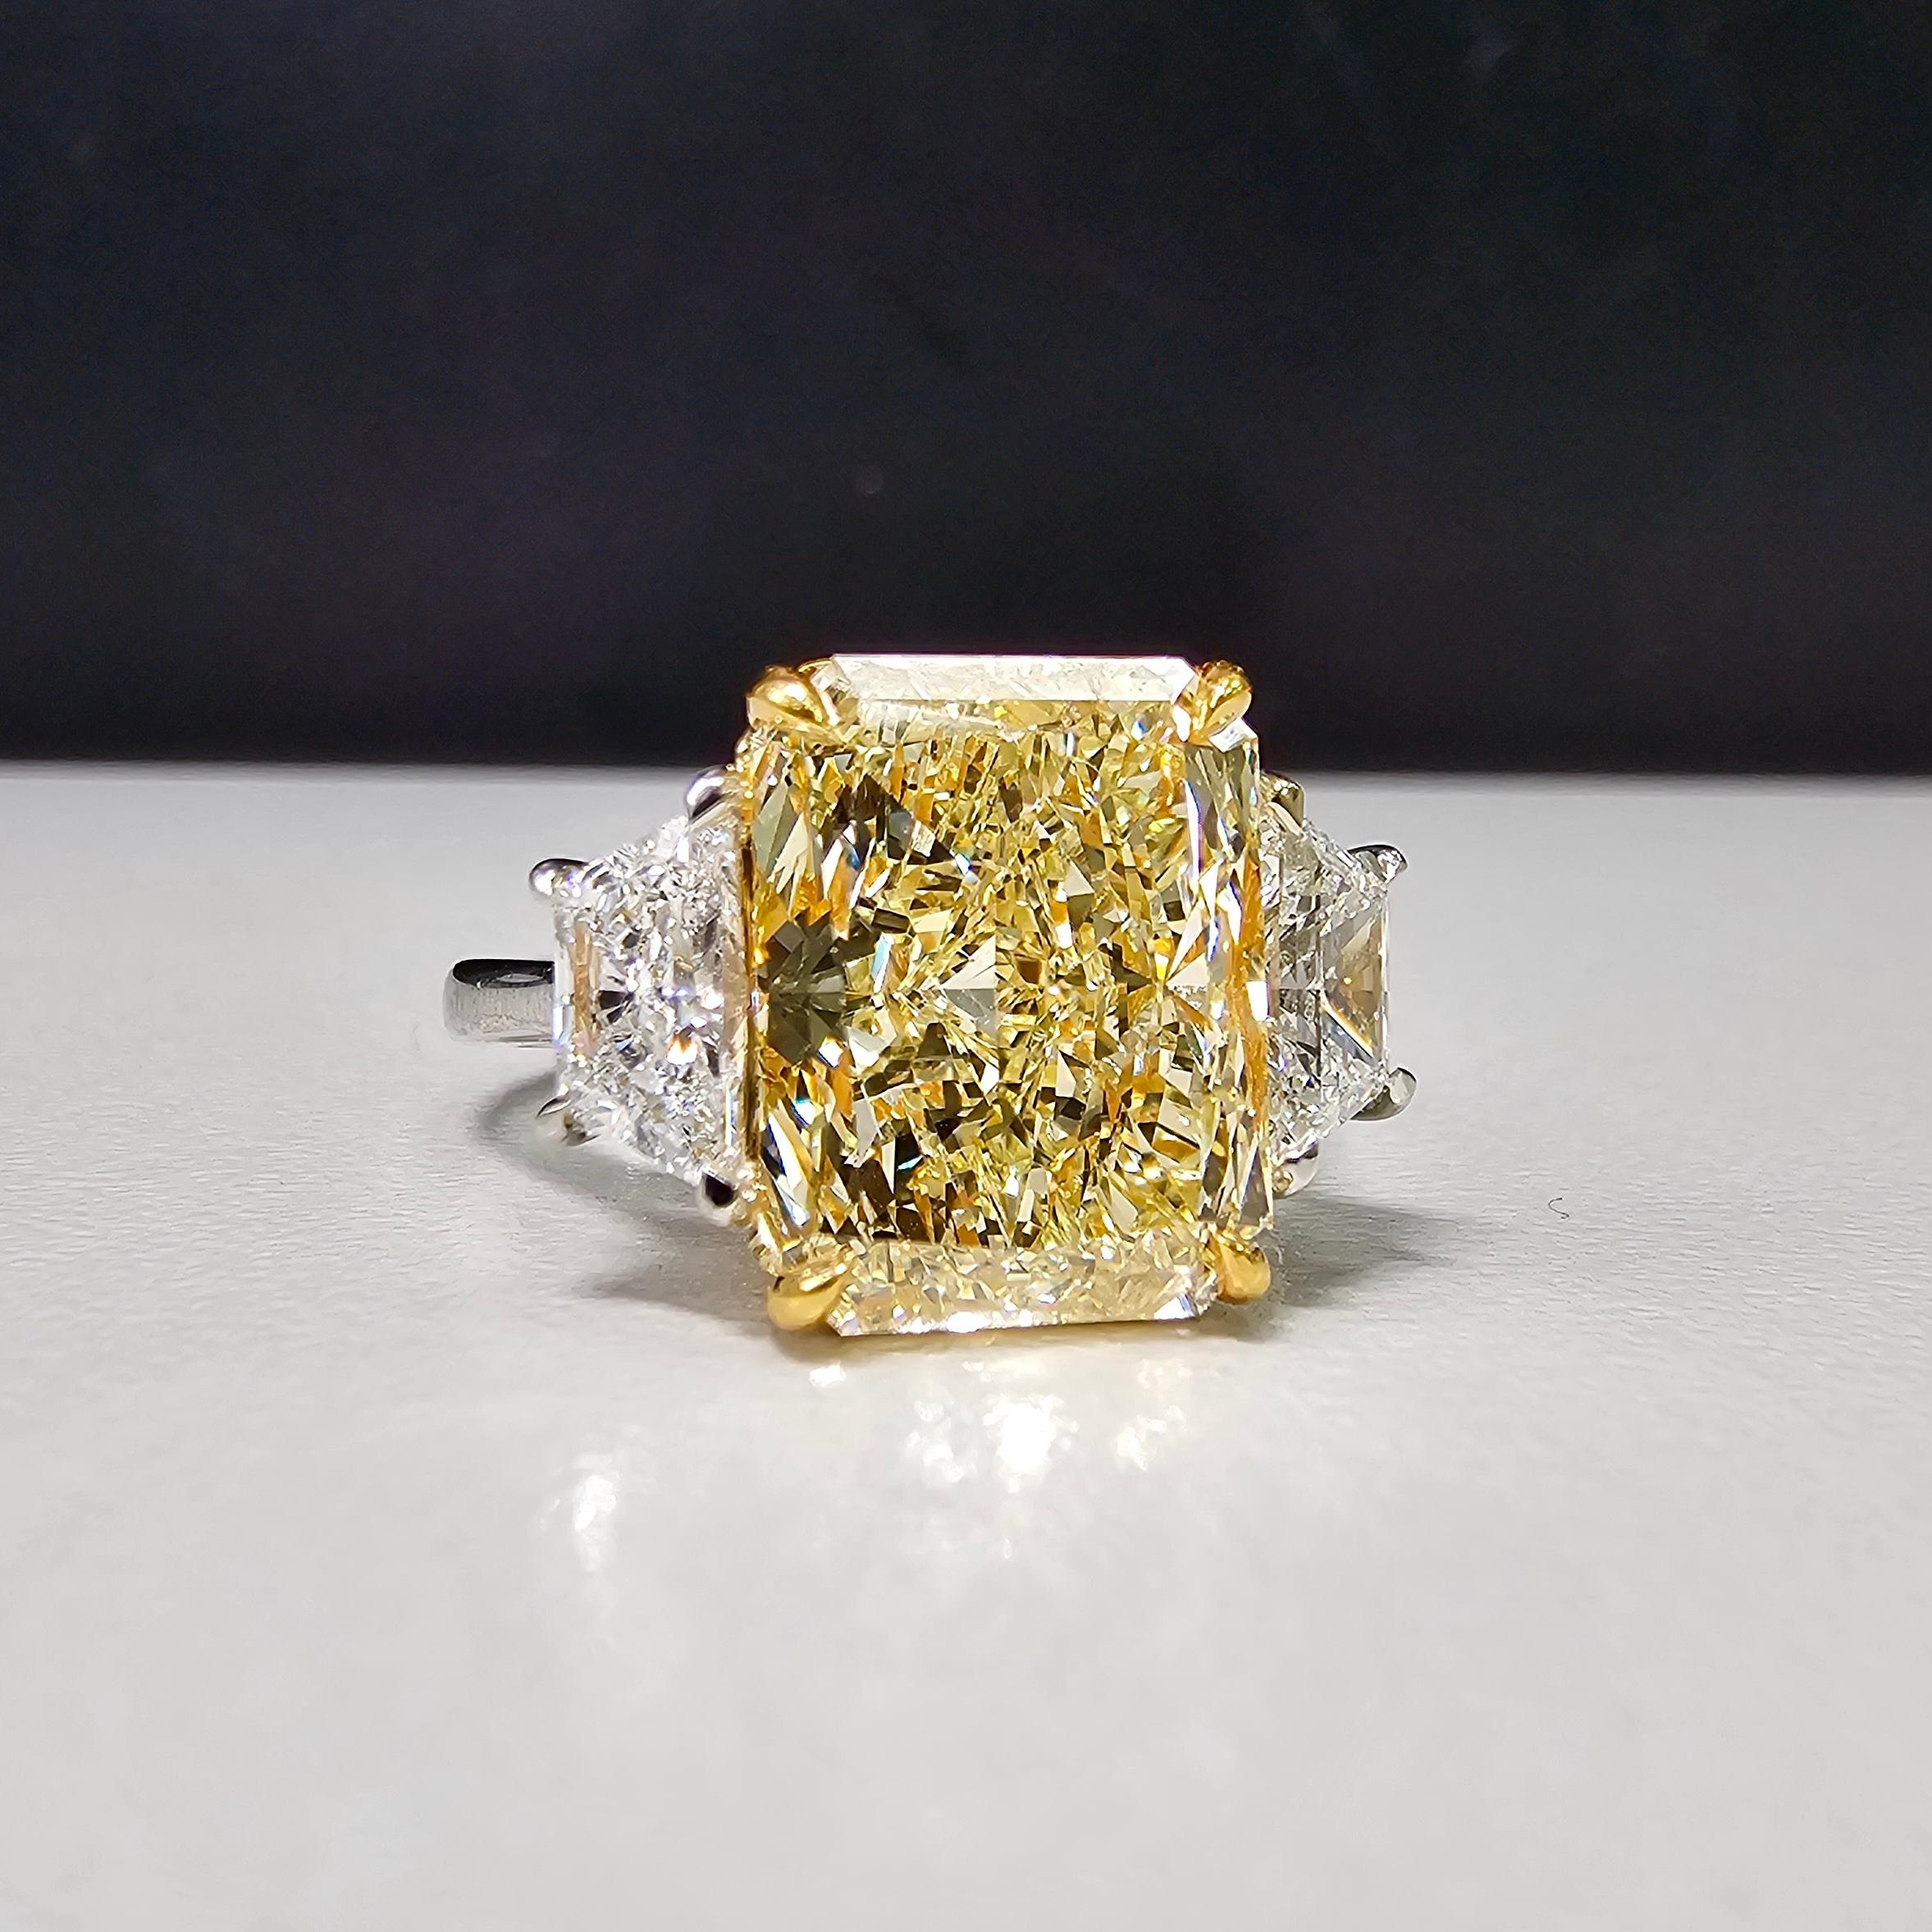 Sensational ring with a perfectly cut 5.34ct elongated radiant, full of life and fire
Impressive 11.6mm length - spreads like a 6-7ct stone!
Amazing VS2 - table is fully clean
Set in Platinum and 18kt Yellow Gold with 0.93ct D VS Trapezoids
This